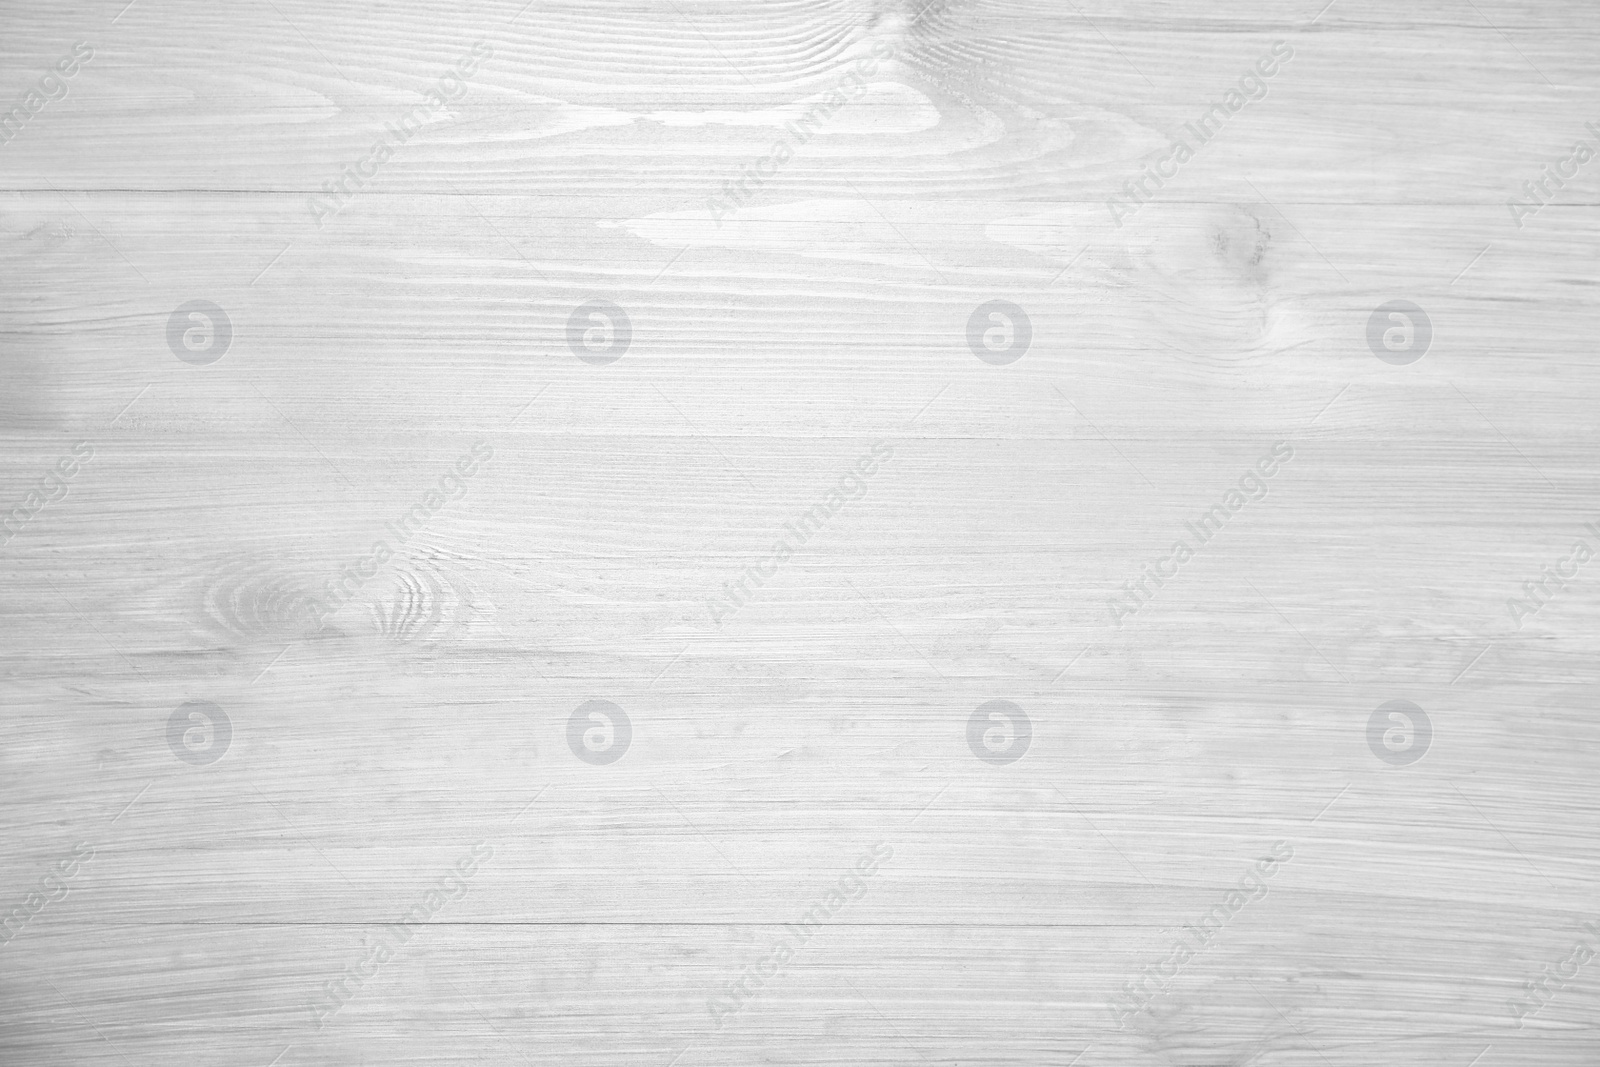 Image of Texture of white wooden surface, top view